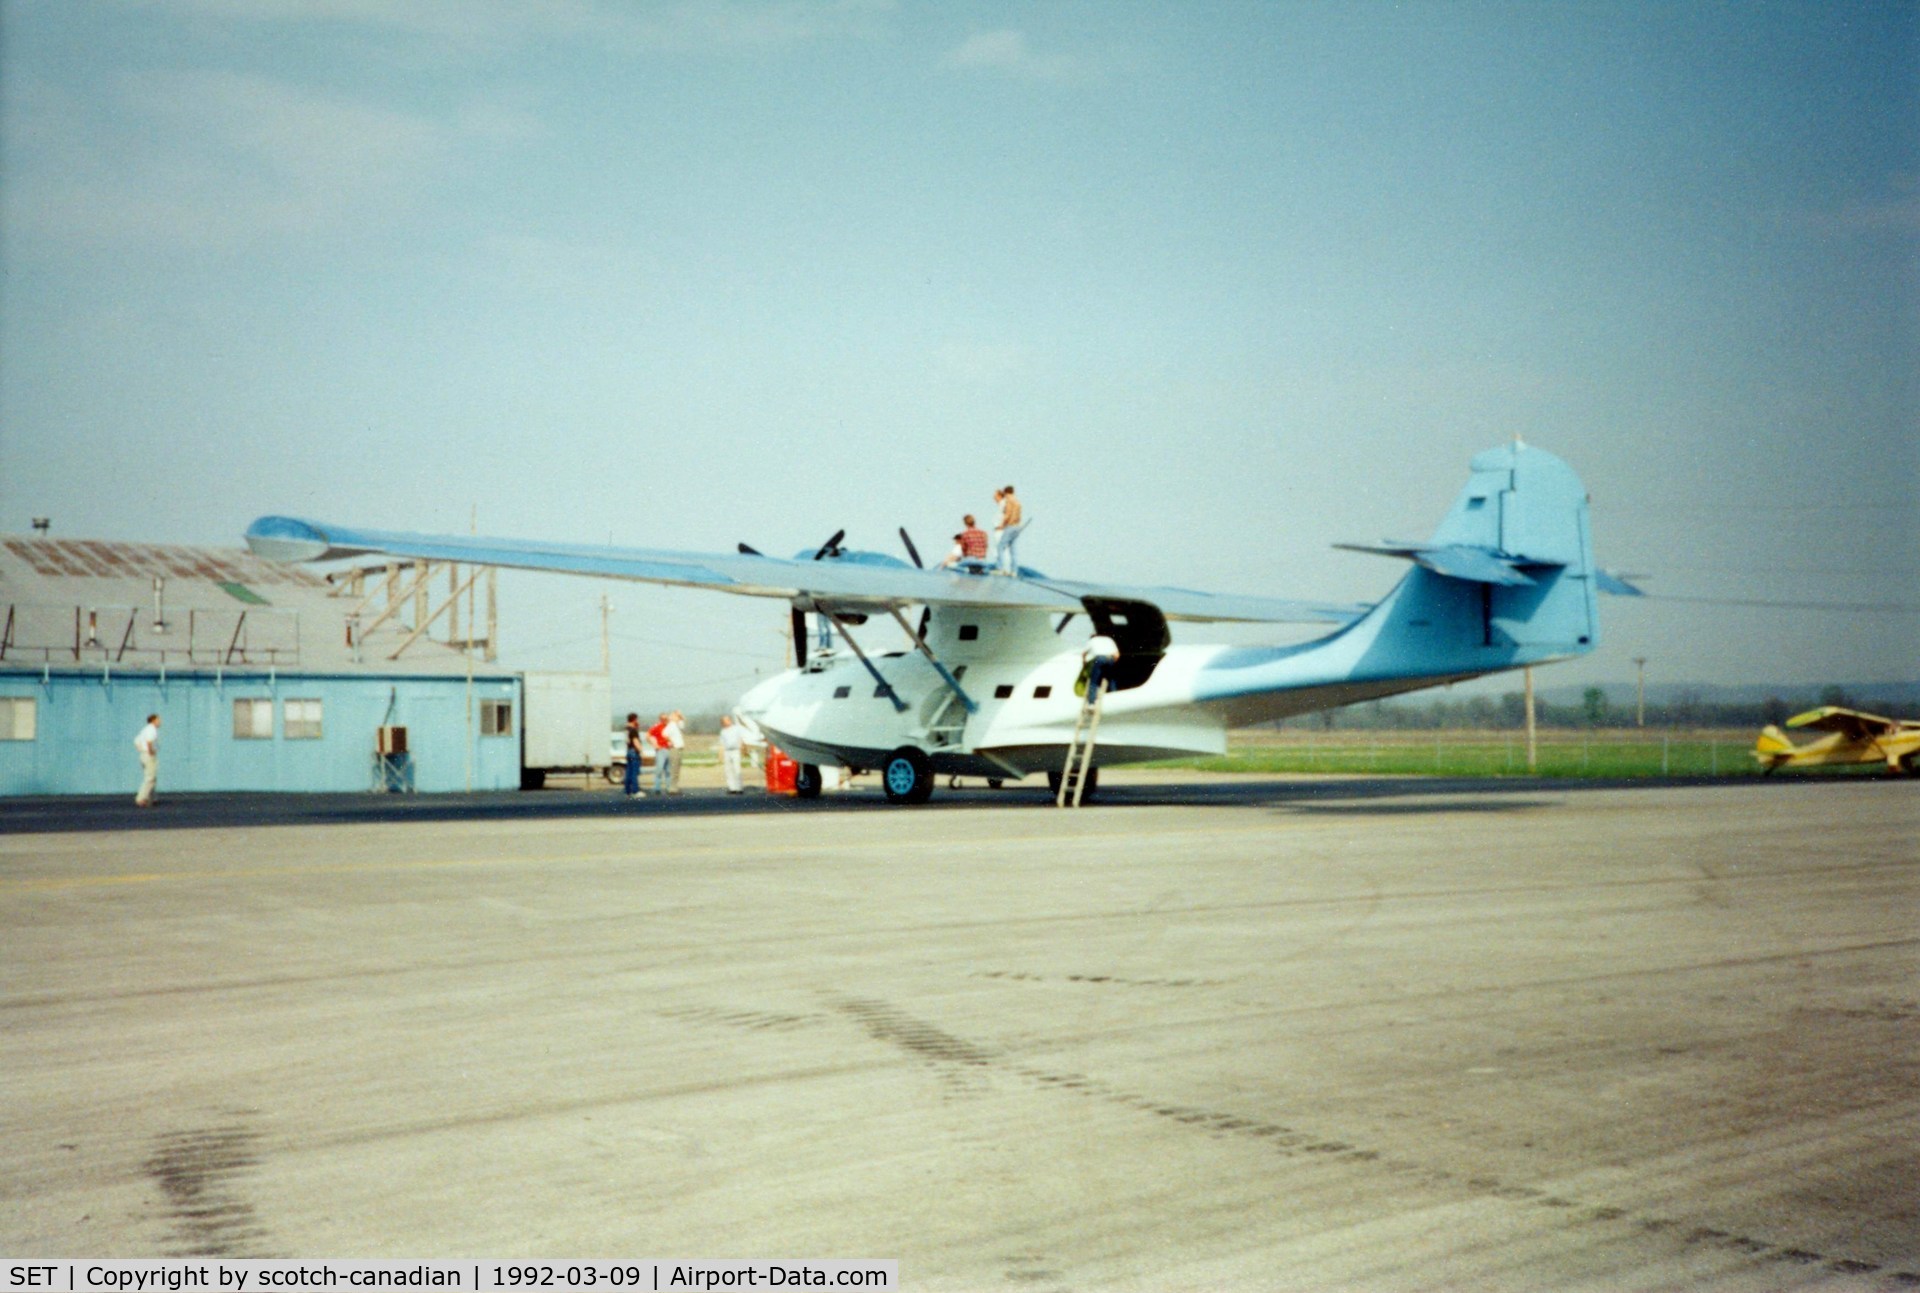 St Charles County Smartt Airport (SET) - PBY Catalina at St. Charles County Smartt Airport, St. Charles, MO. In 1992 the FAA identifier was 3SZ. 